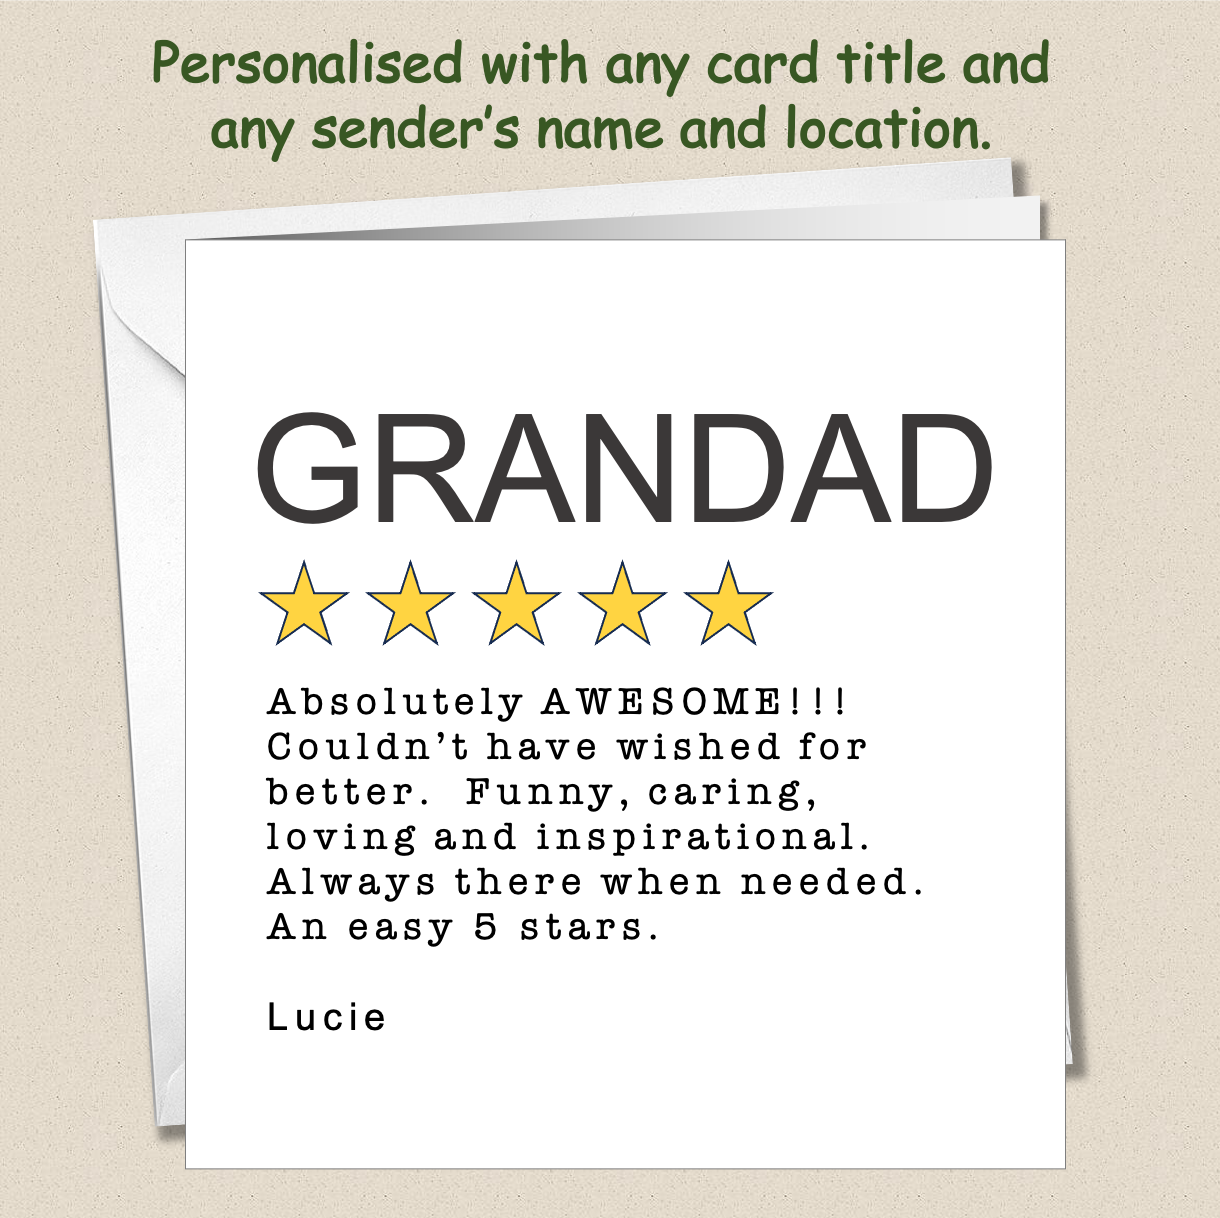 Personalised Father's Day Card - 5 Star Review